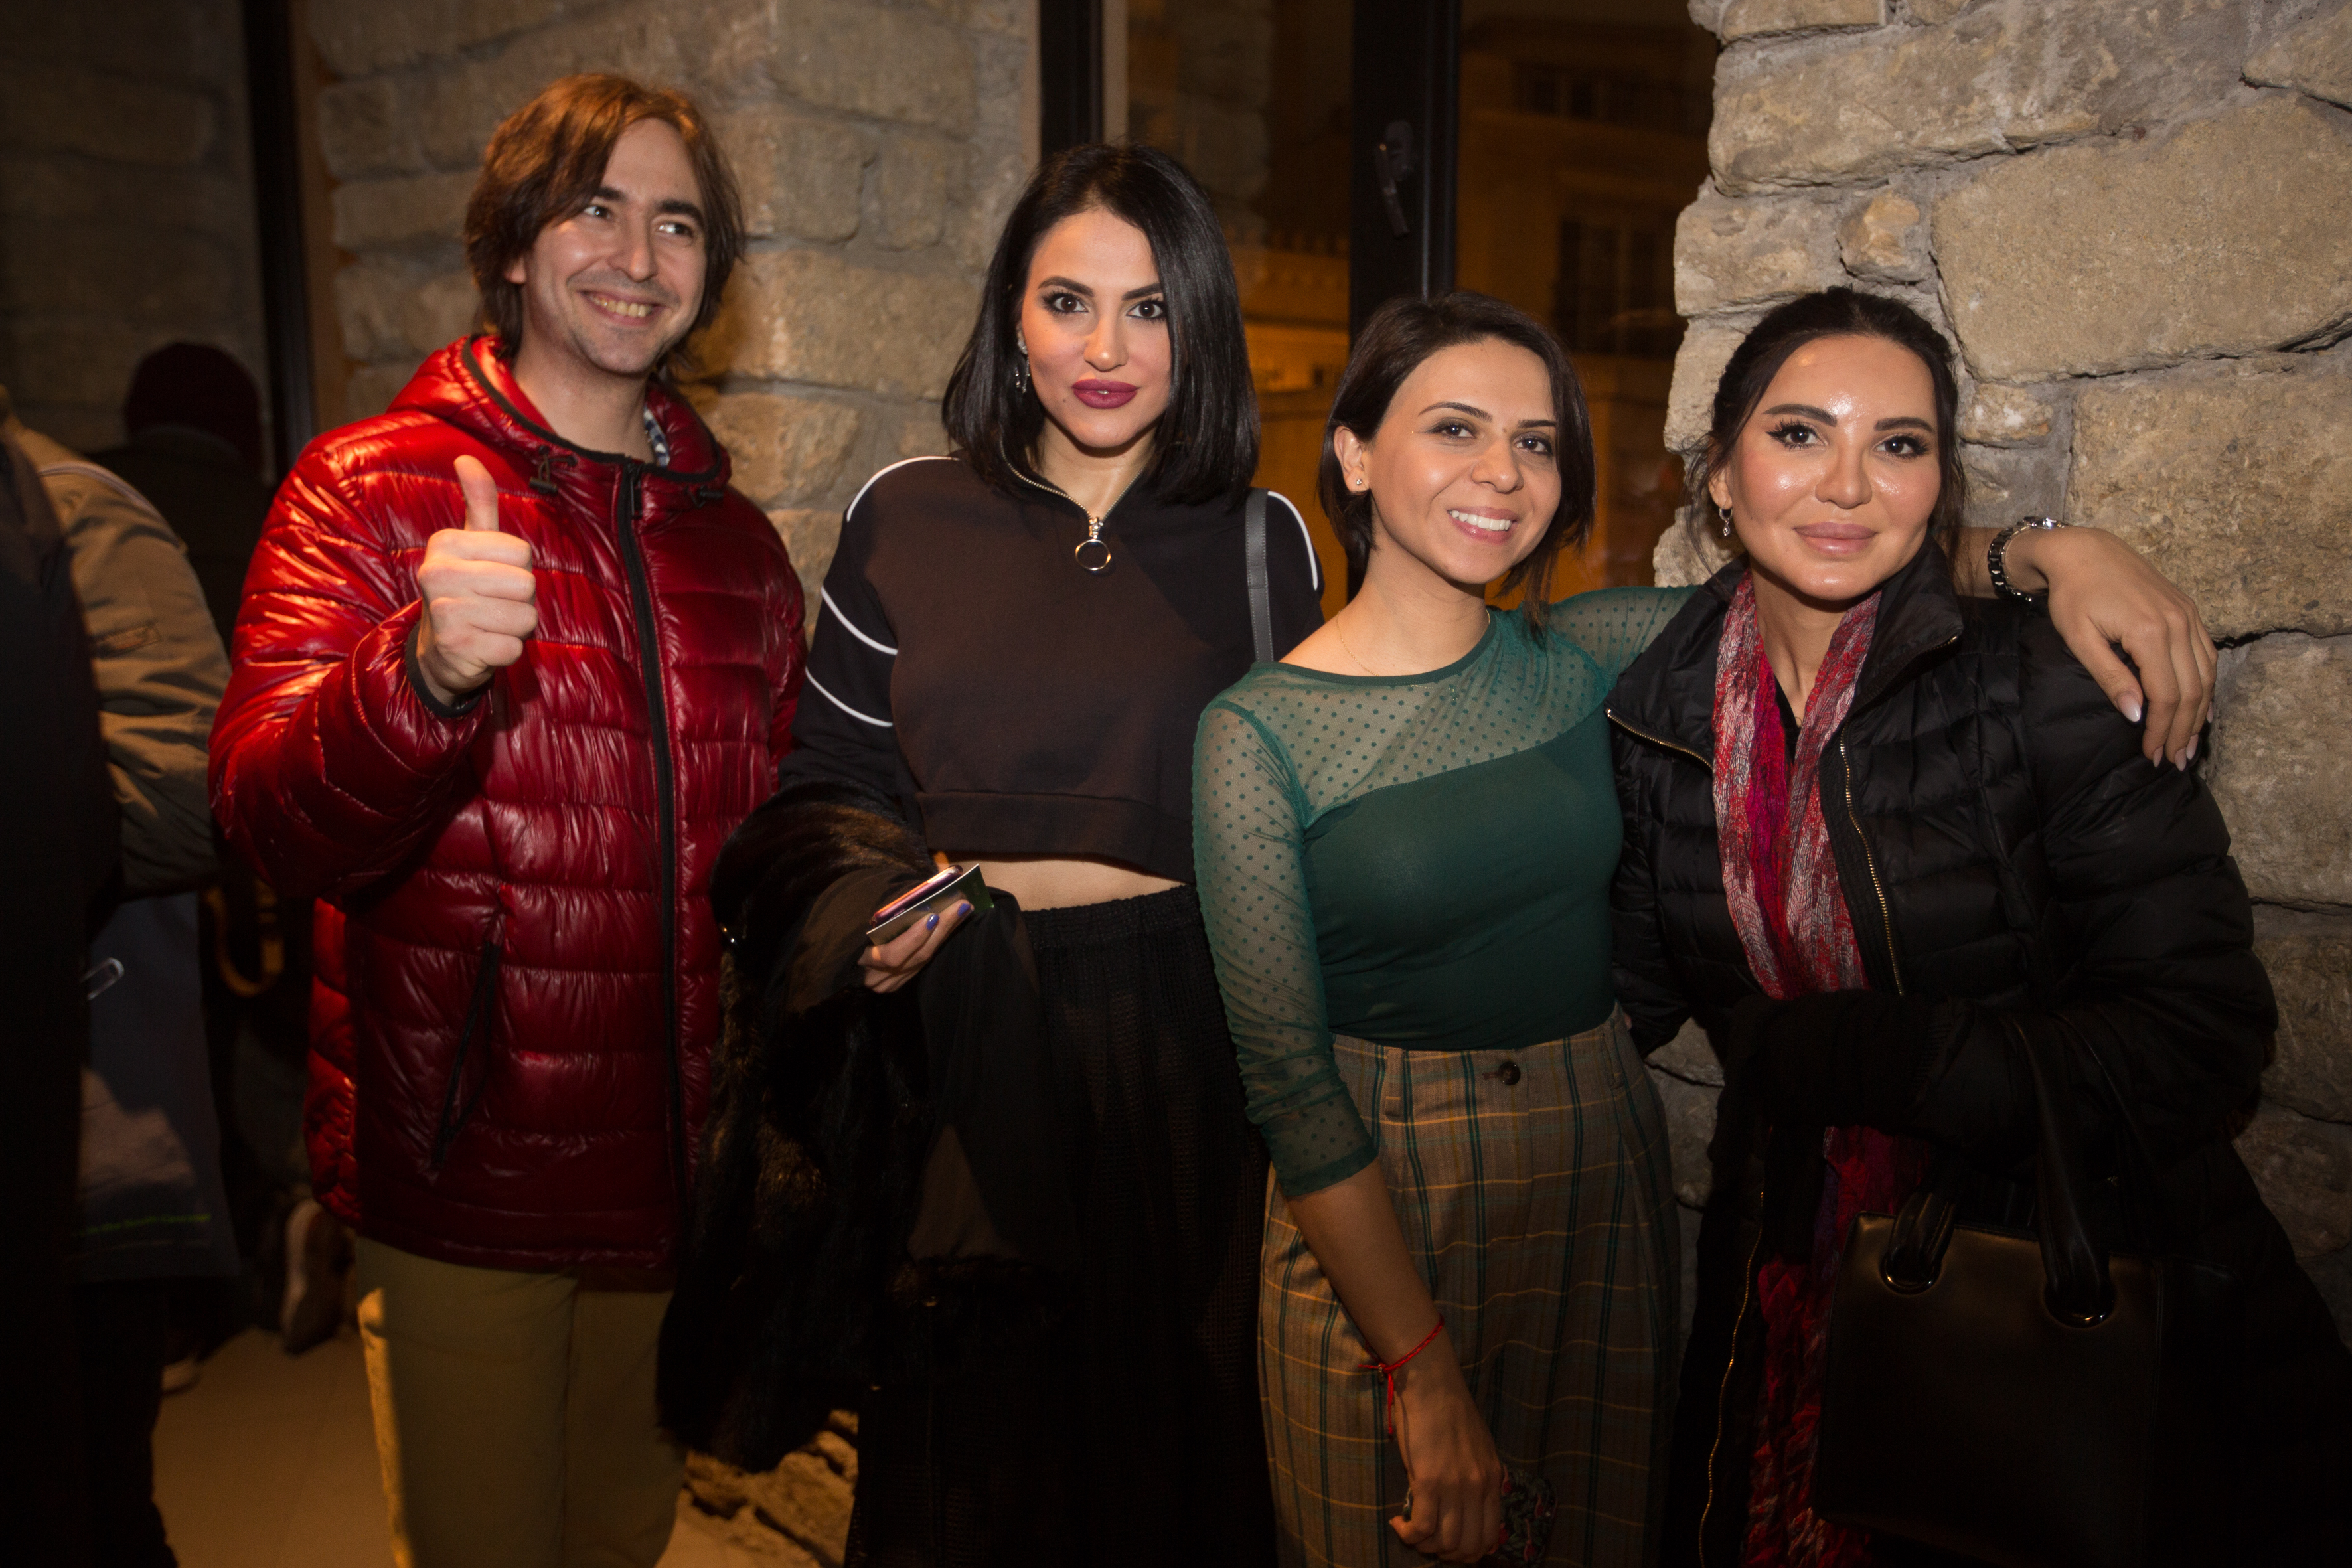 Guests at the opening of "The Intimate Beauty" in Baku